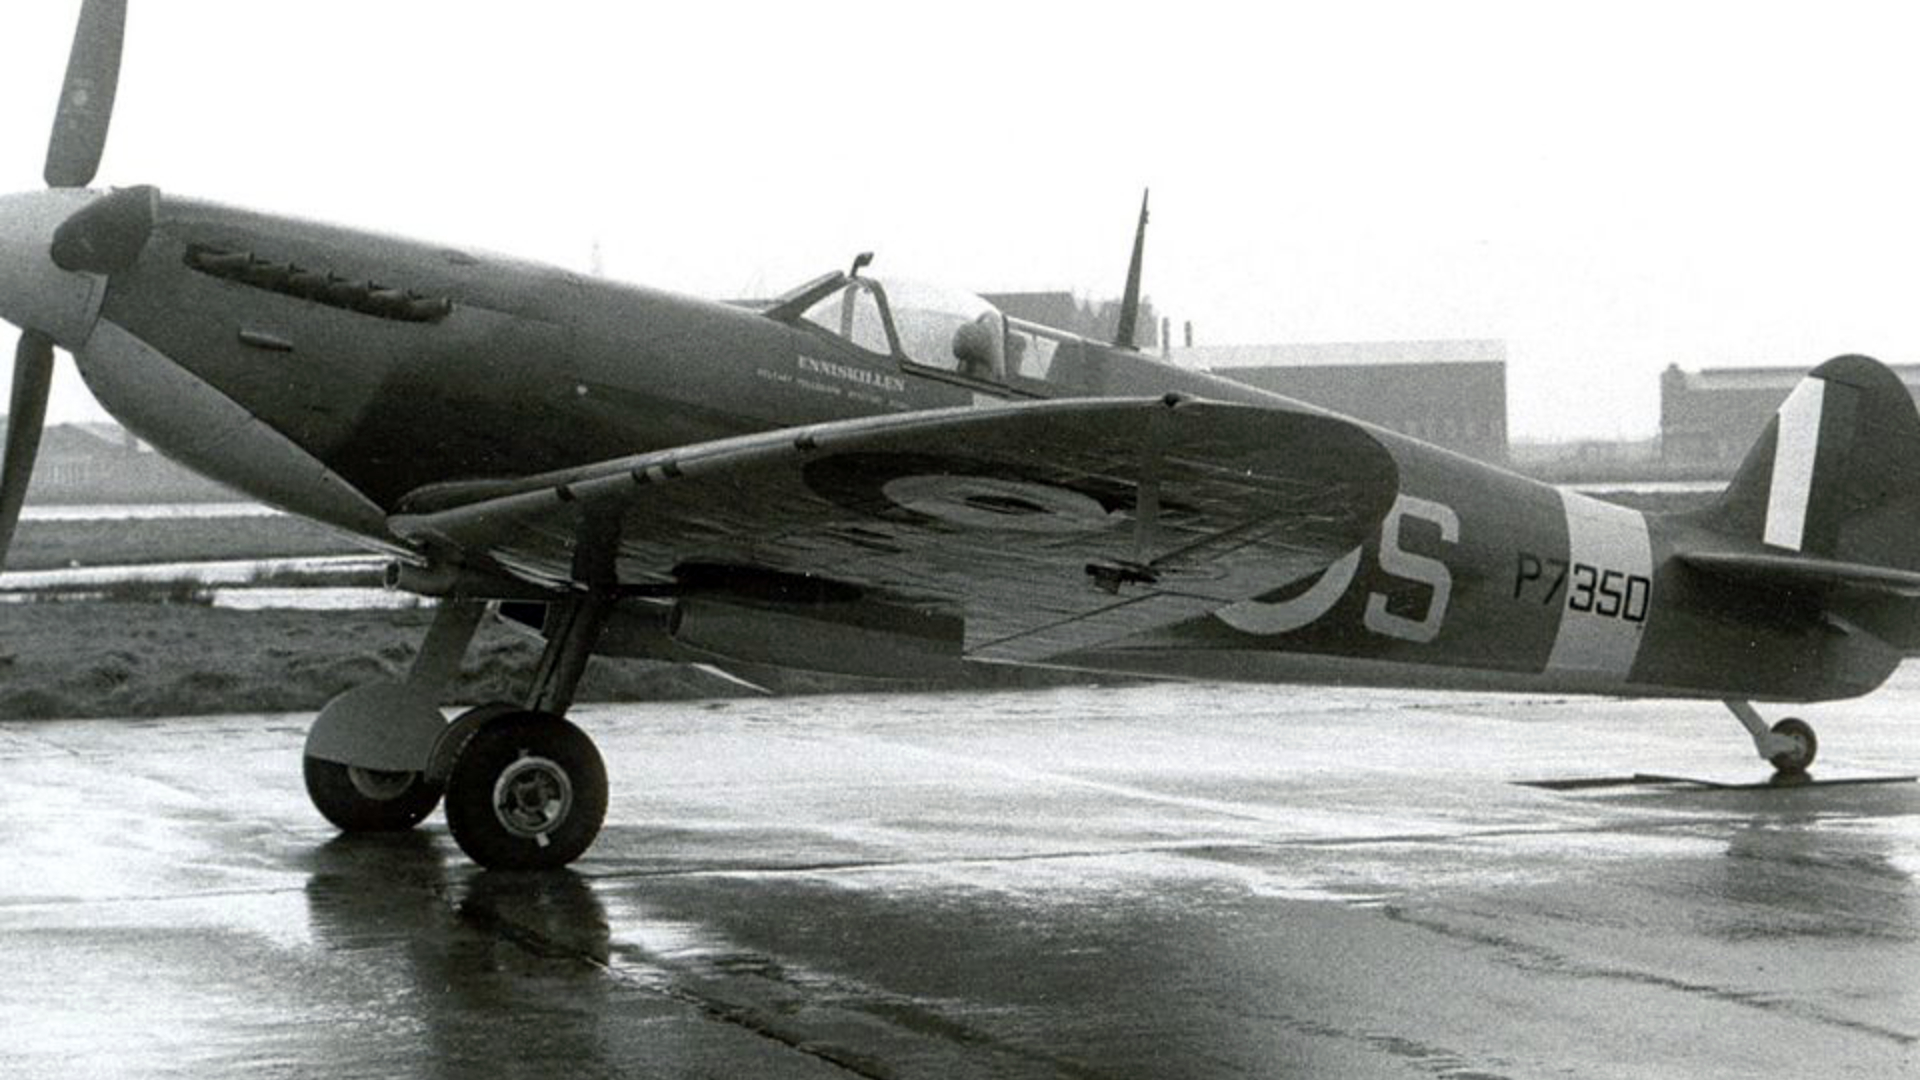 The Enniskillen Spitfire was constructed thanks to finances raised by residents of the Co. Fermanagh town as part of the Belfast Telegraph Spitfire Fund in 1940.